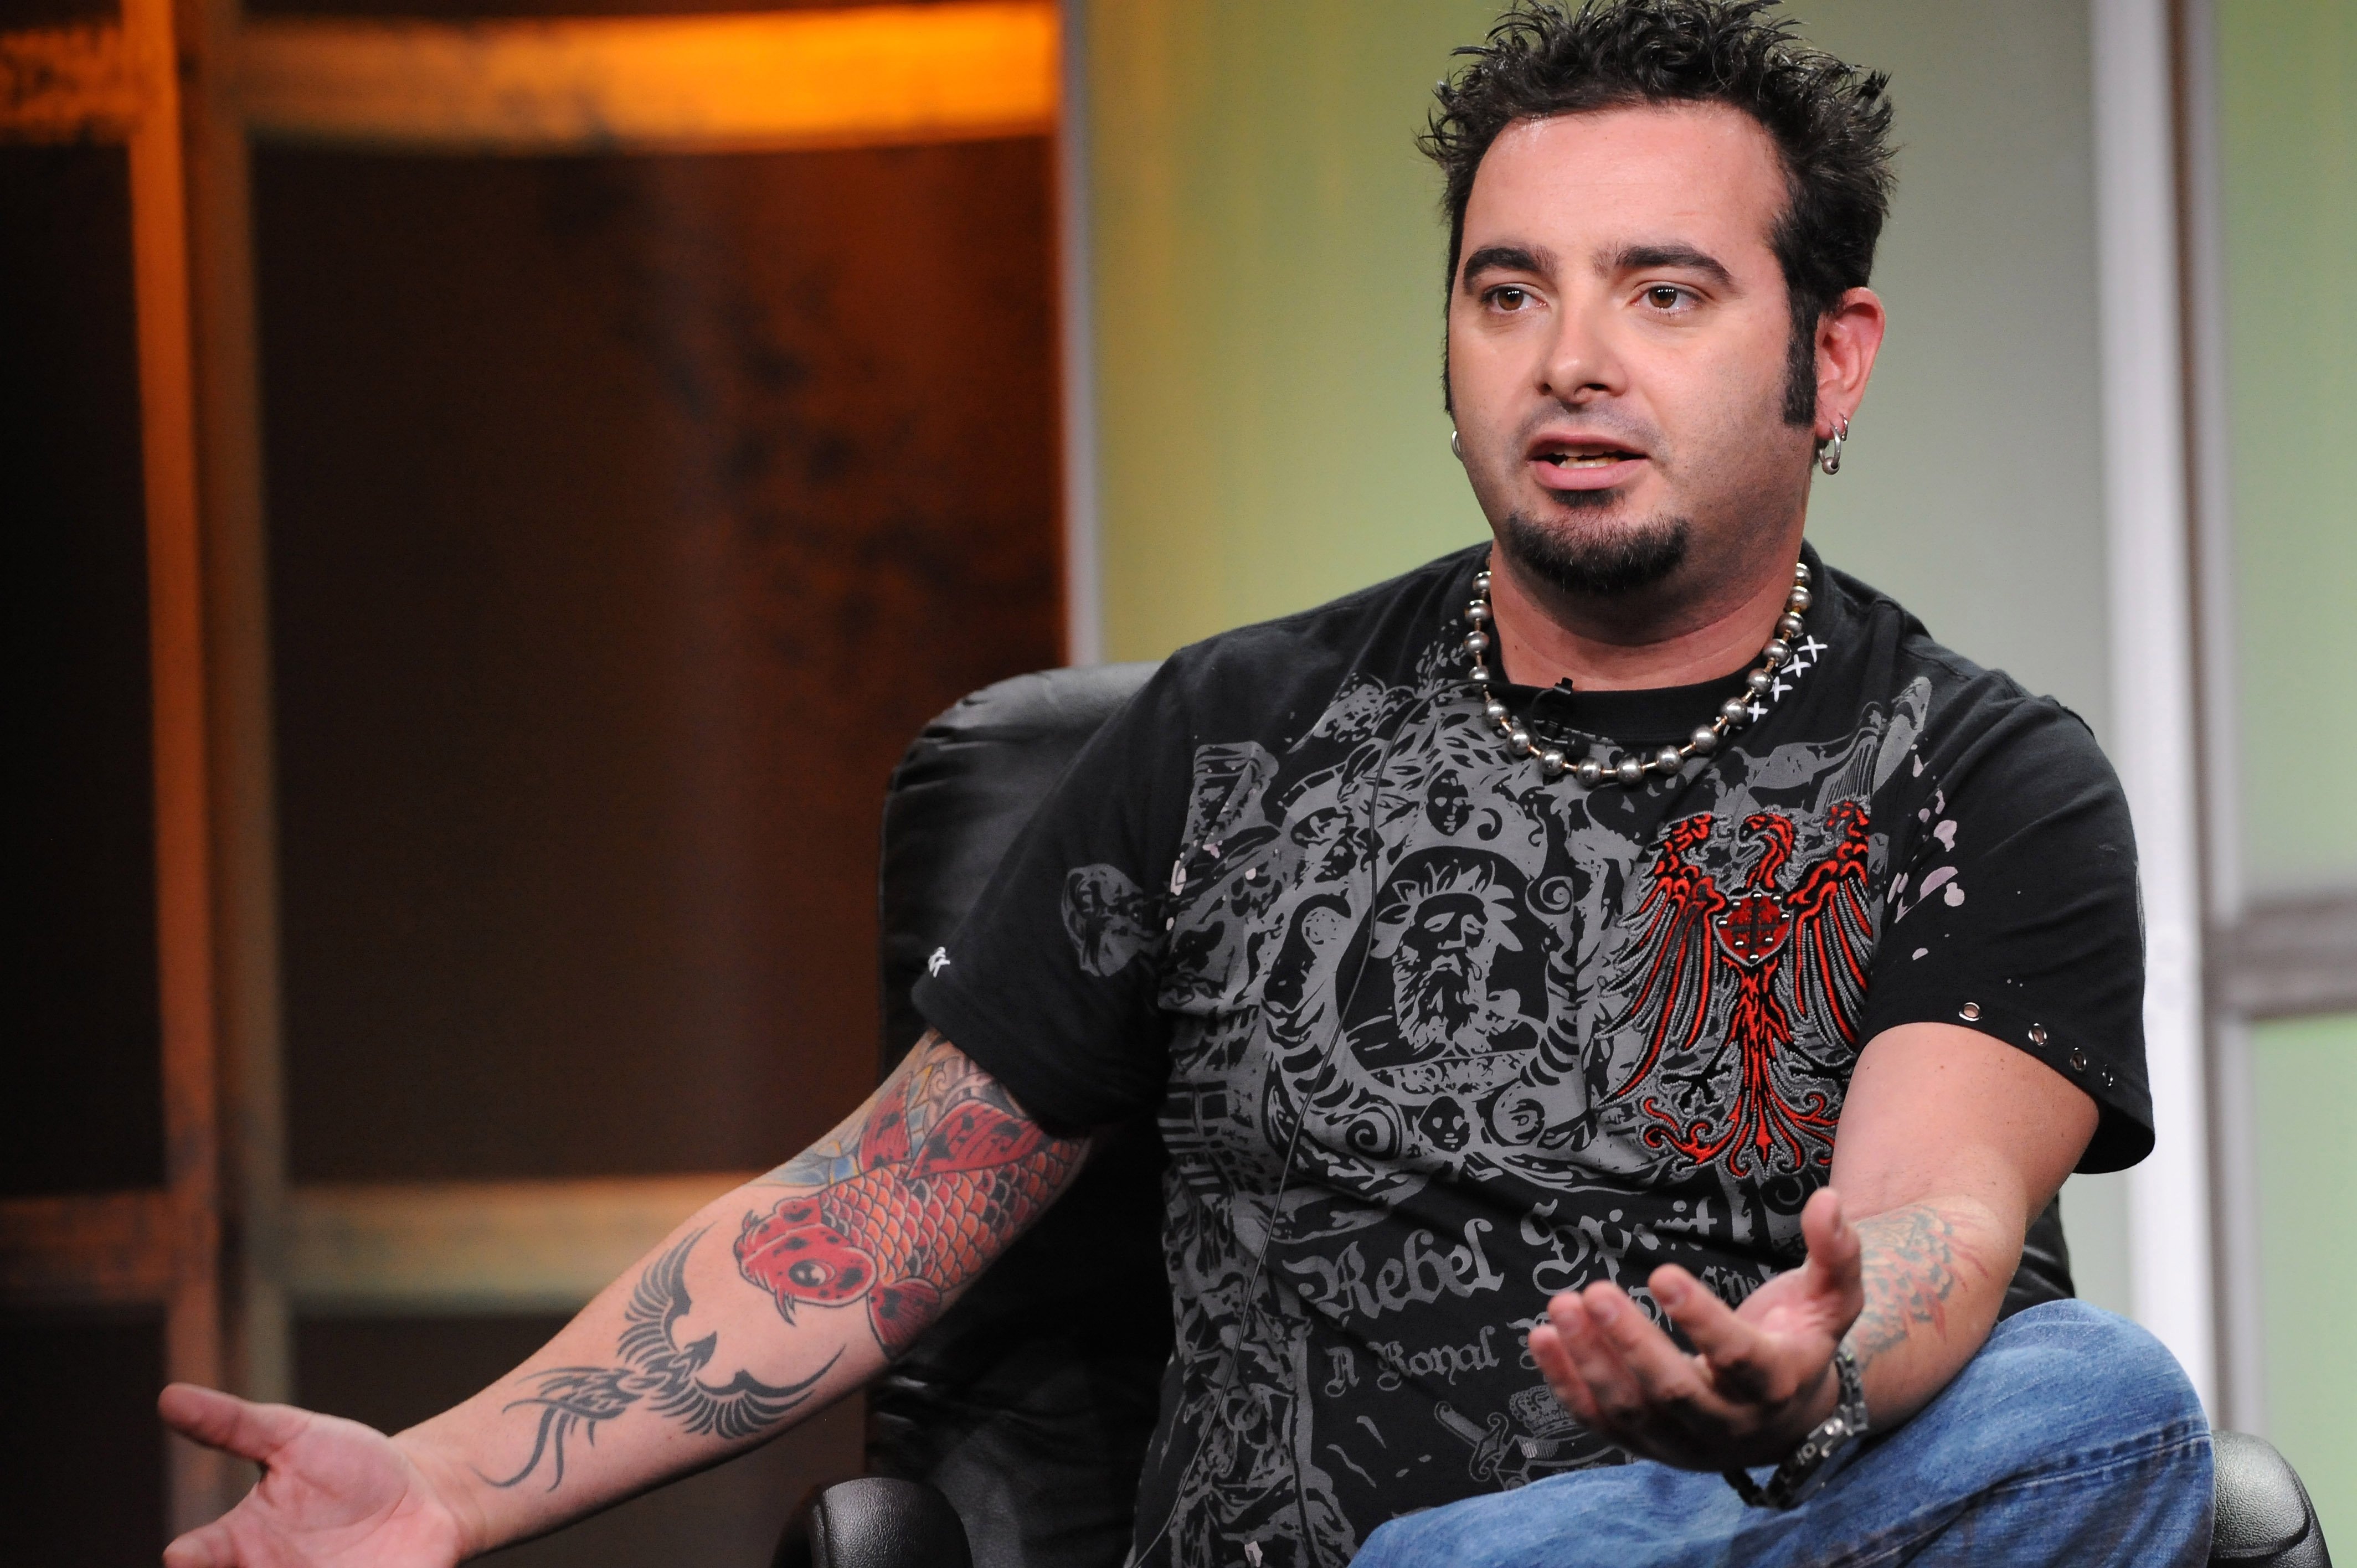 Singer Chris Kirkpatrick of Gone Counrty Season Two speaks during the 2008 Summer Television Critics Association Press Tour